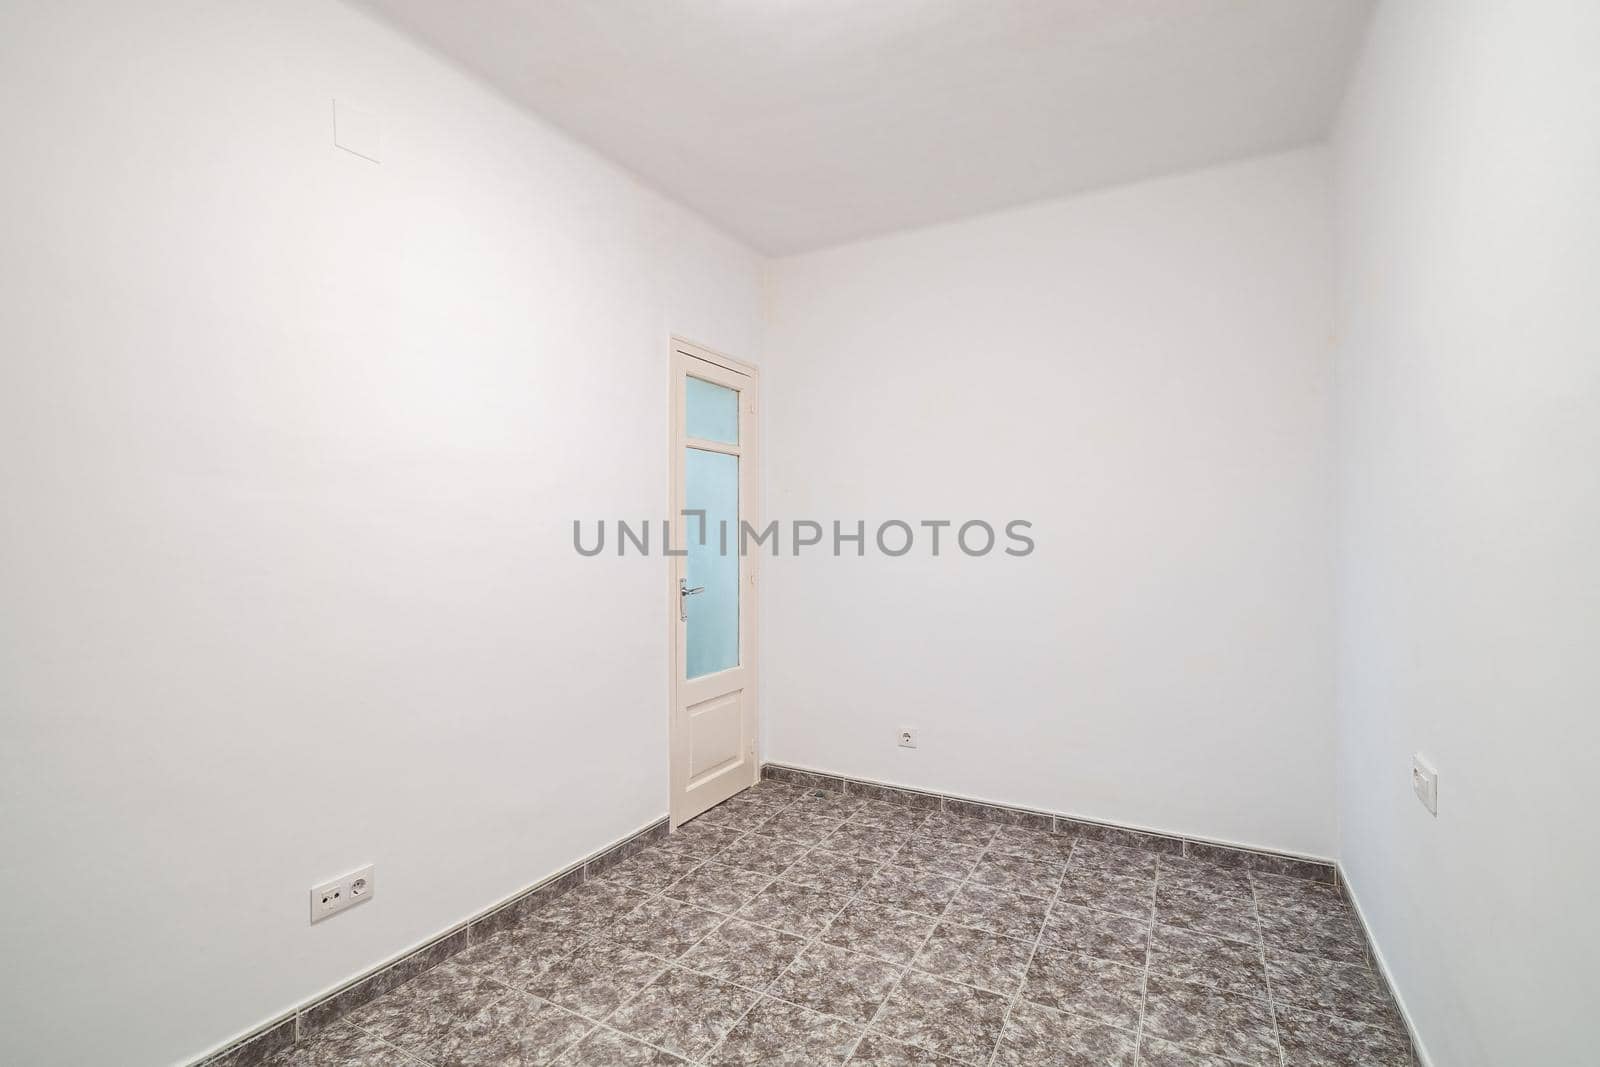 Room interior after renovation, unfurnished apartment with white walls, tiled floor and small door. by apavlin